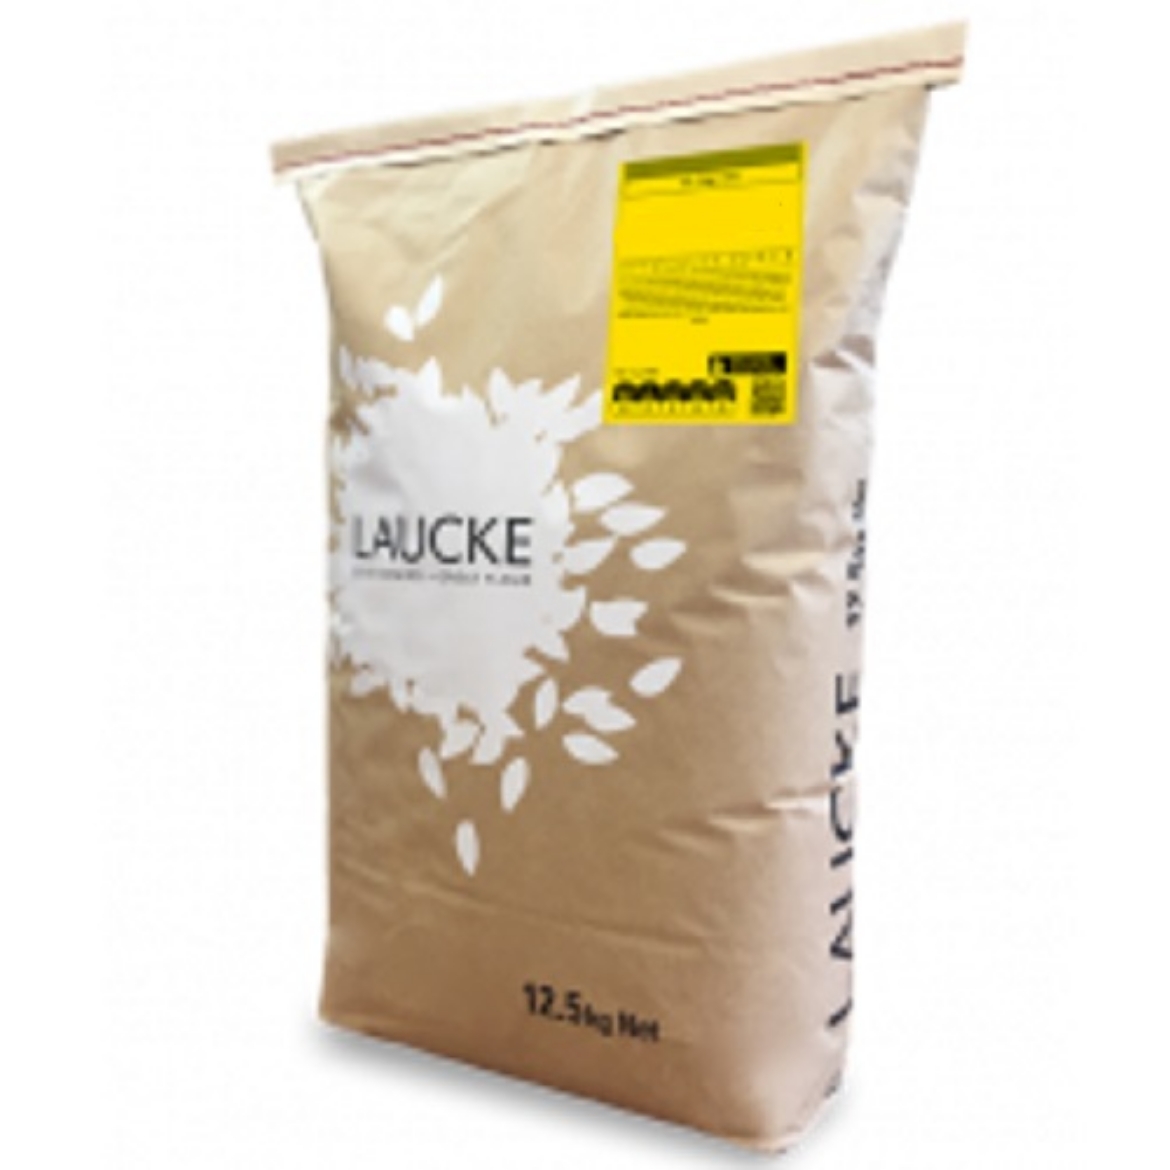 Picture of 12.5KG LAUCKE BETTONG FLOUR (s/ord)